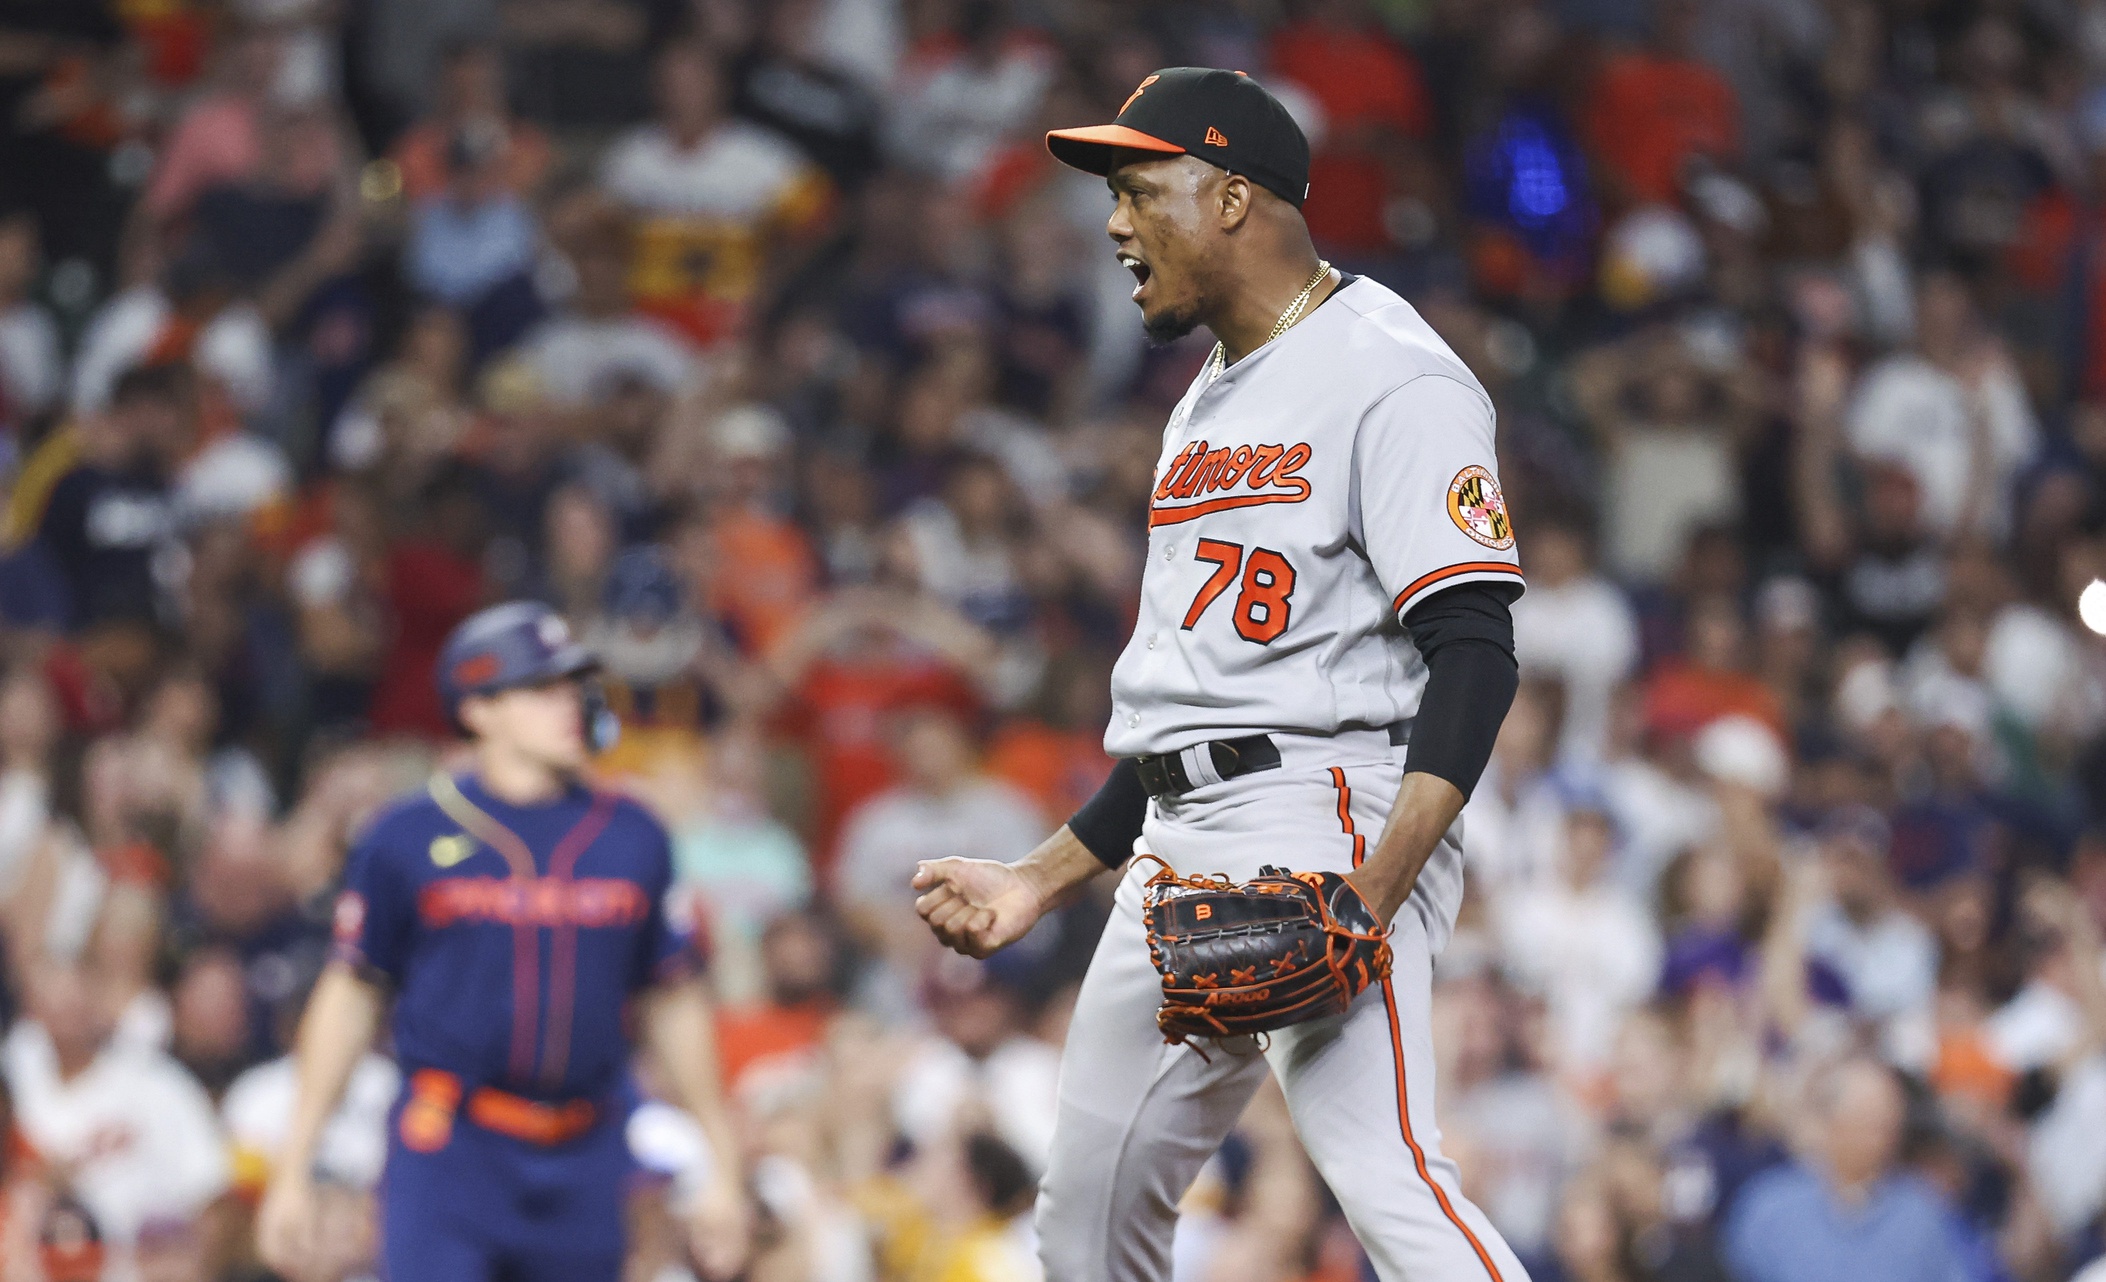 Orioles reduce magic number in AL East to one